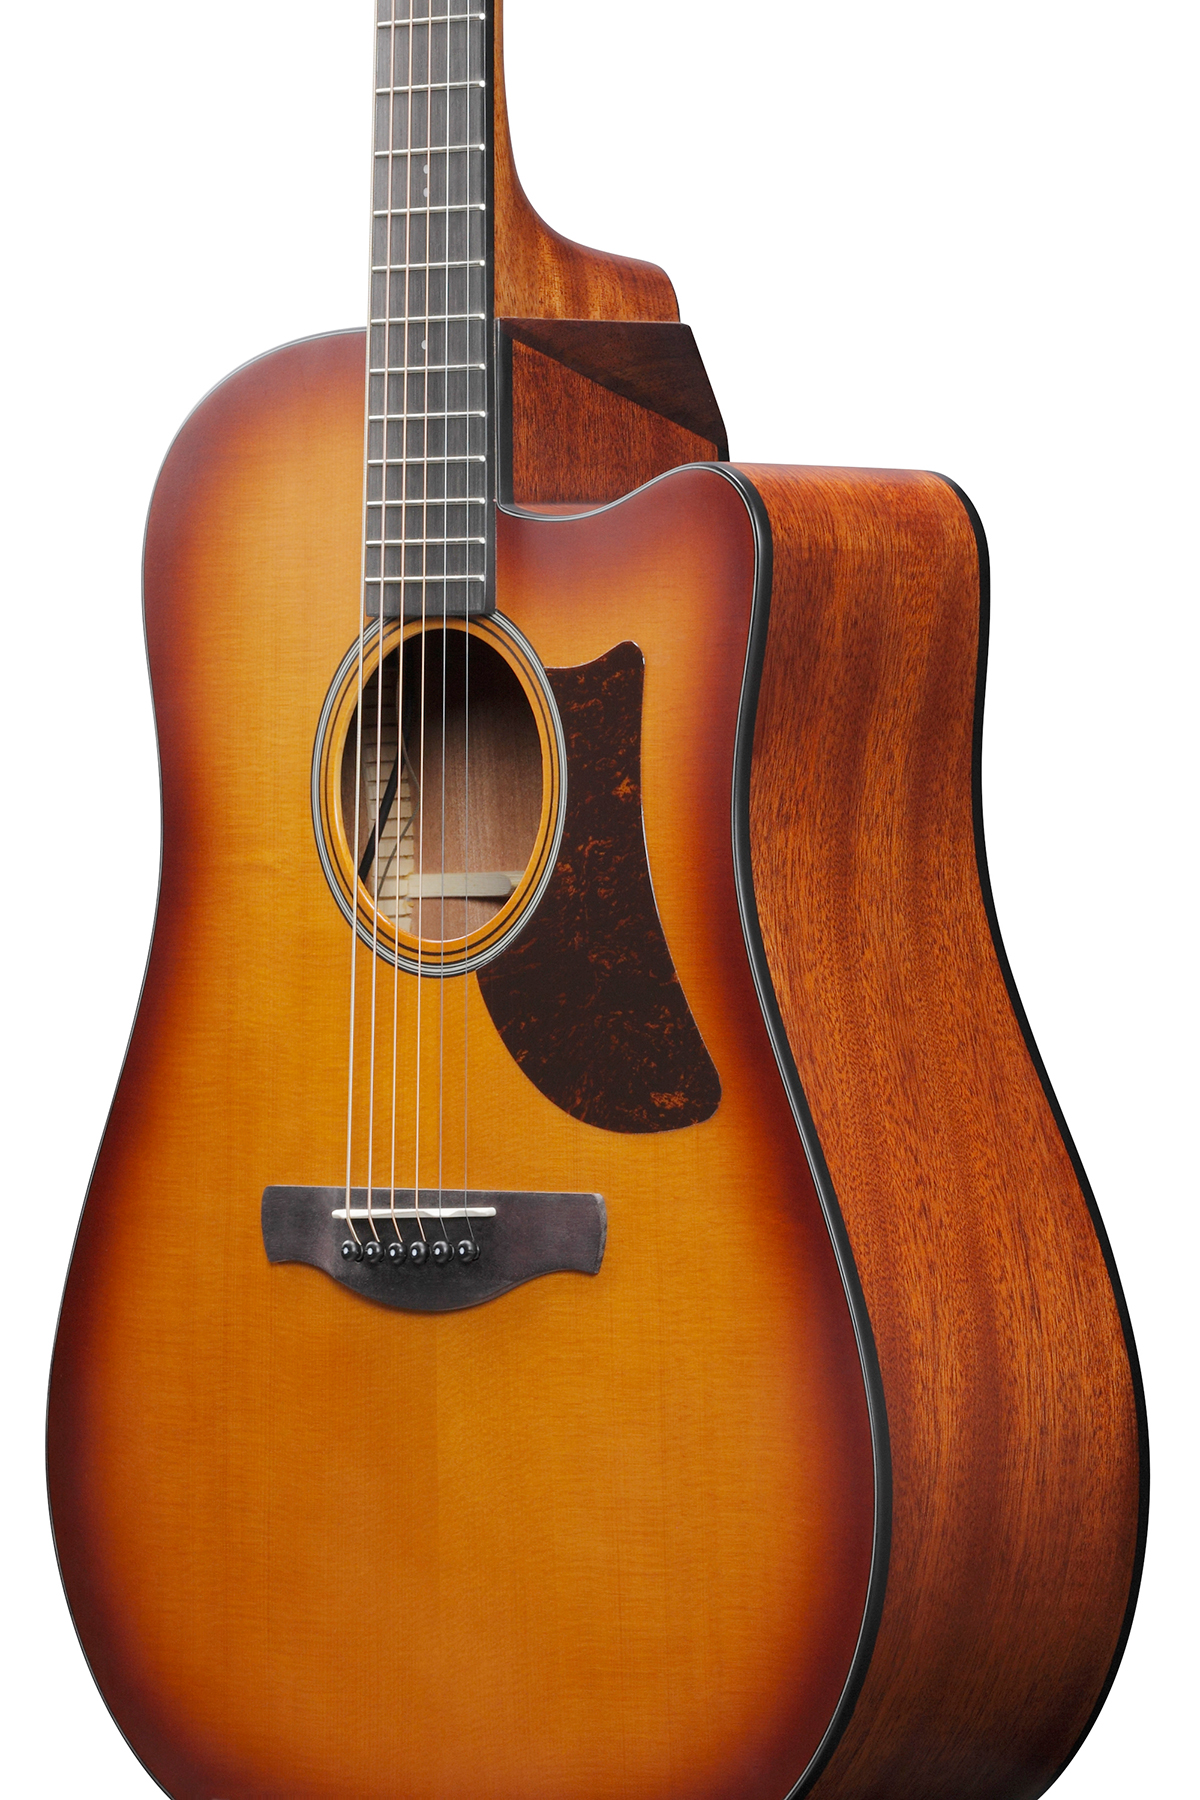 Ibanez Aad50ce Lbs Advanced Dreadnought Cw Epicea Sapele Pur - Light Brown Sunburst Low Gloss - Electro acoustic guitar - Variation 2